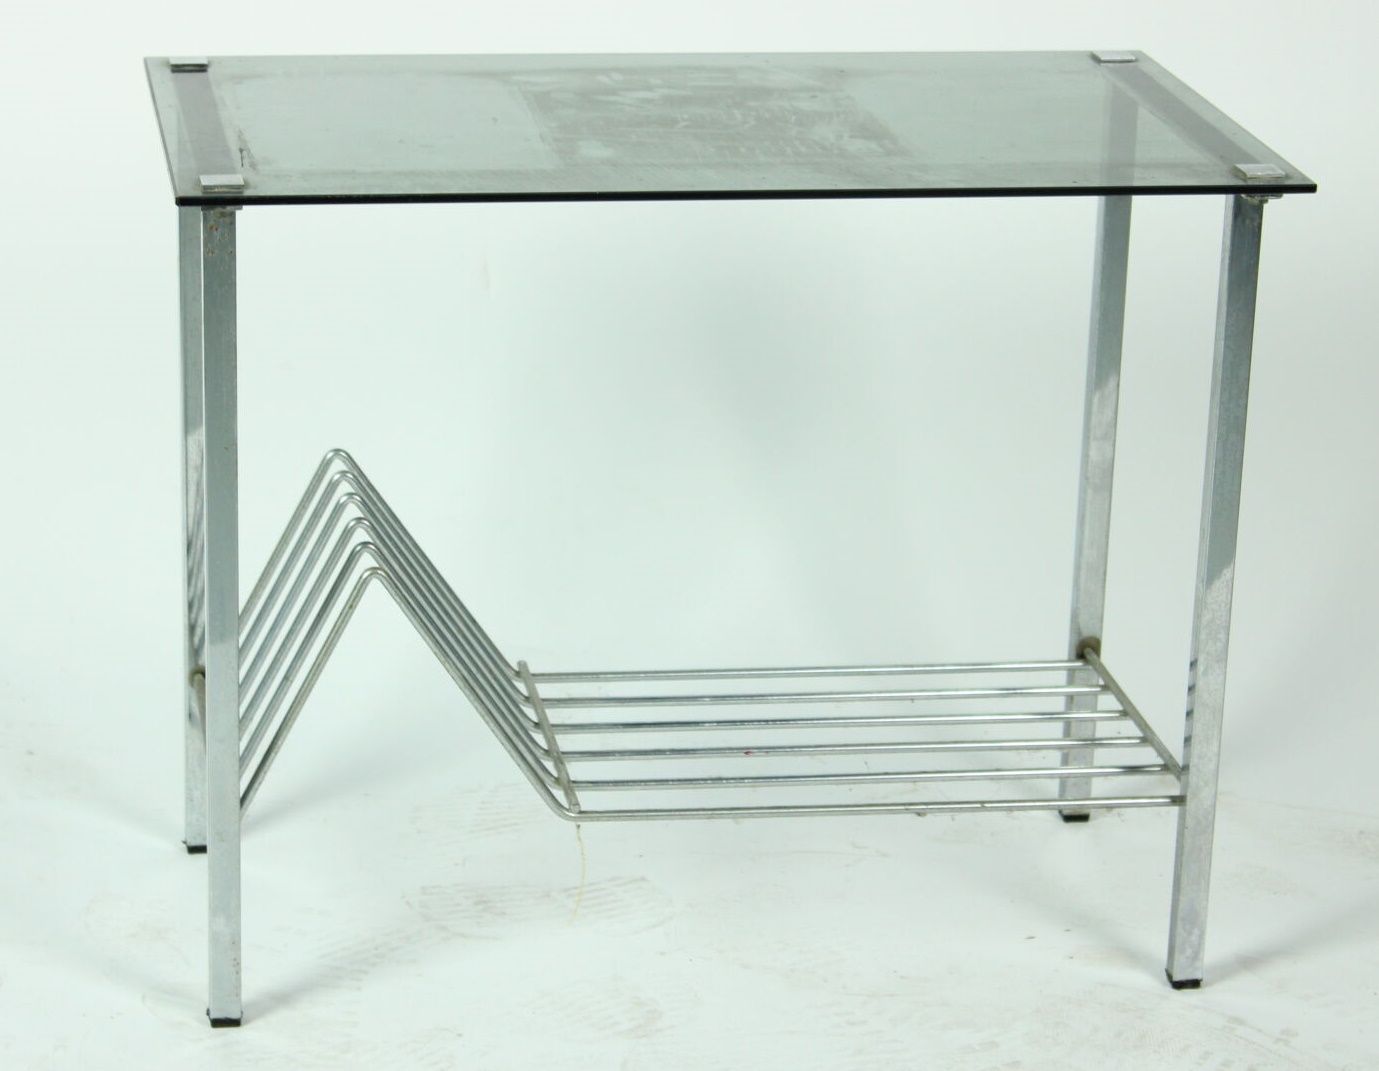 Null Coffee table in aluminum and glass. Dimensions: 45 x 56 x 33 cm.